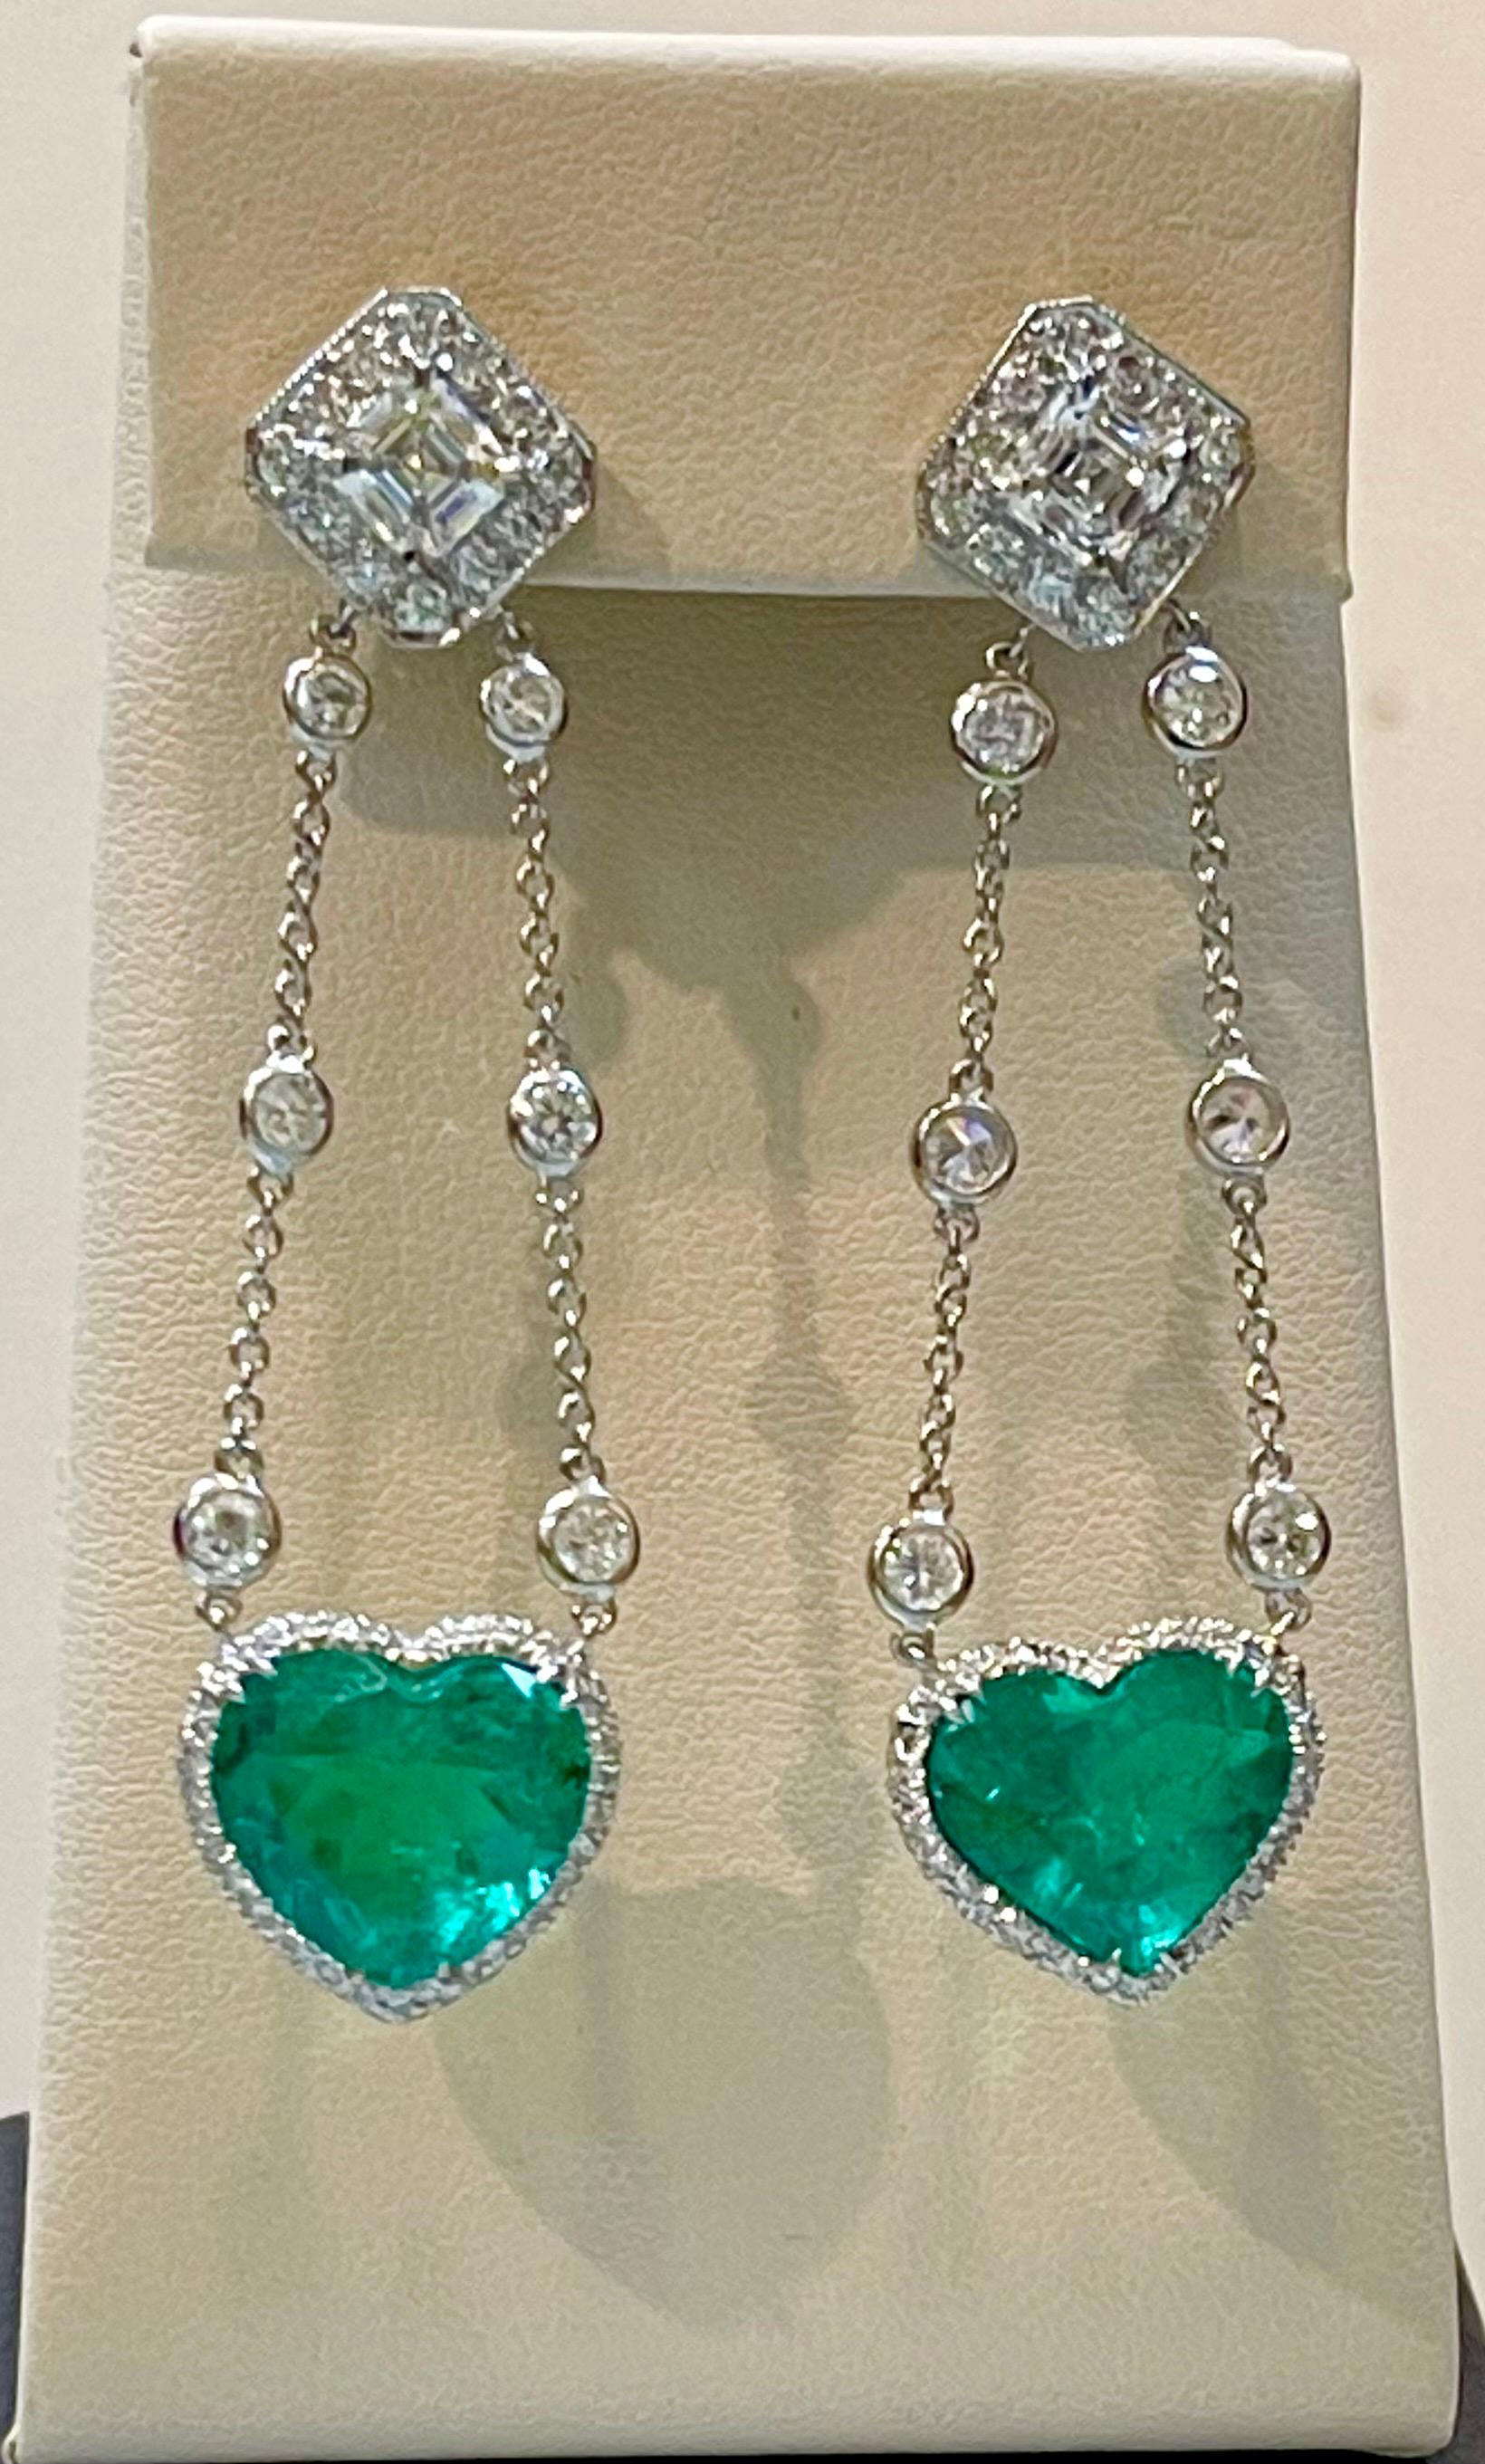 GIA Certified Heart Shape Perfect pair Colombian Emerald & GIA certified Solitaire Diamond Earring
One of the rare piece as the heart shape emerald pair is a perfect pair , extremely   fine quality and perfect heart shape which has two Square